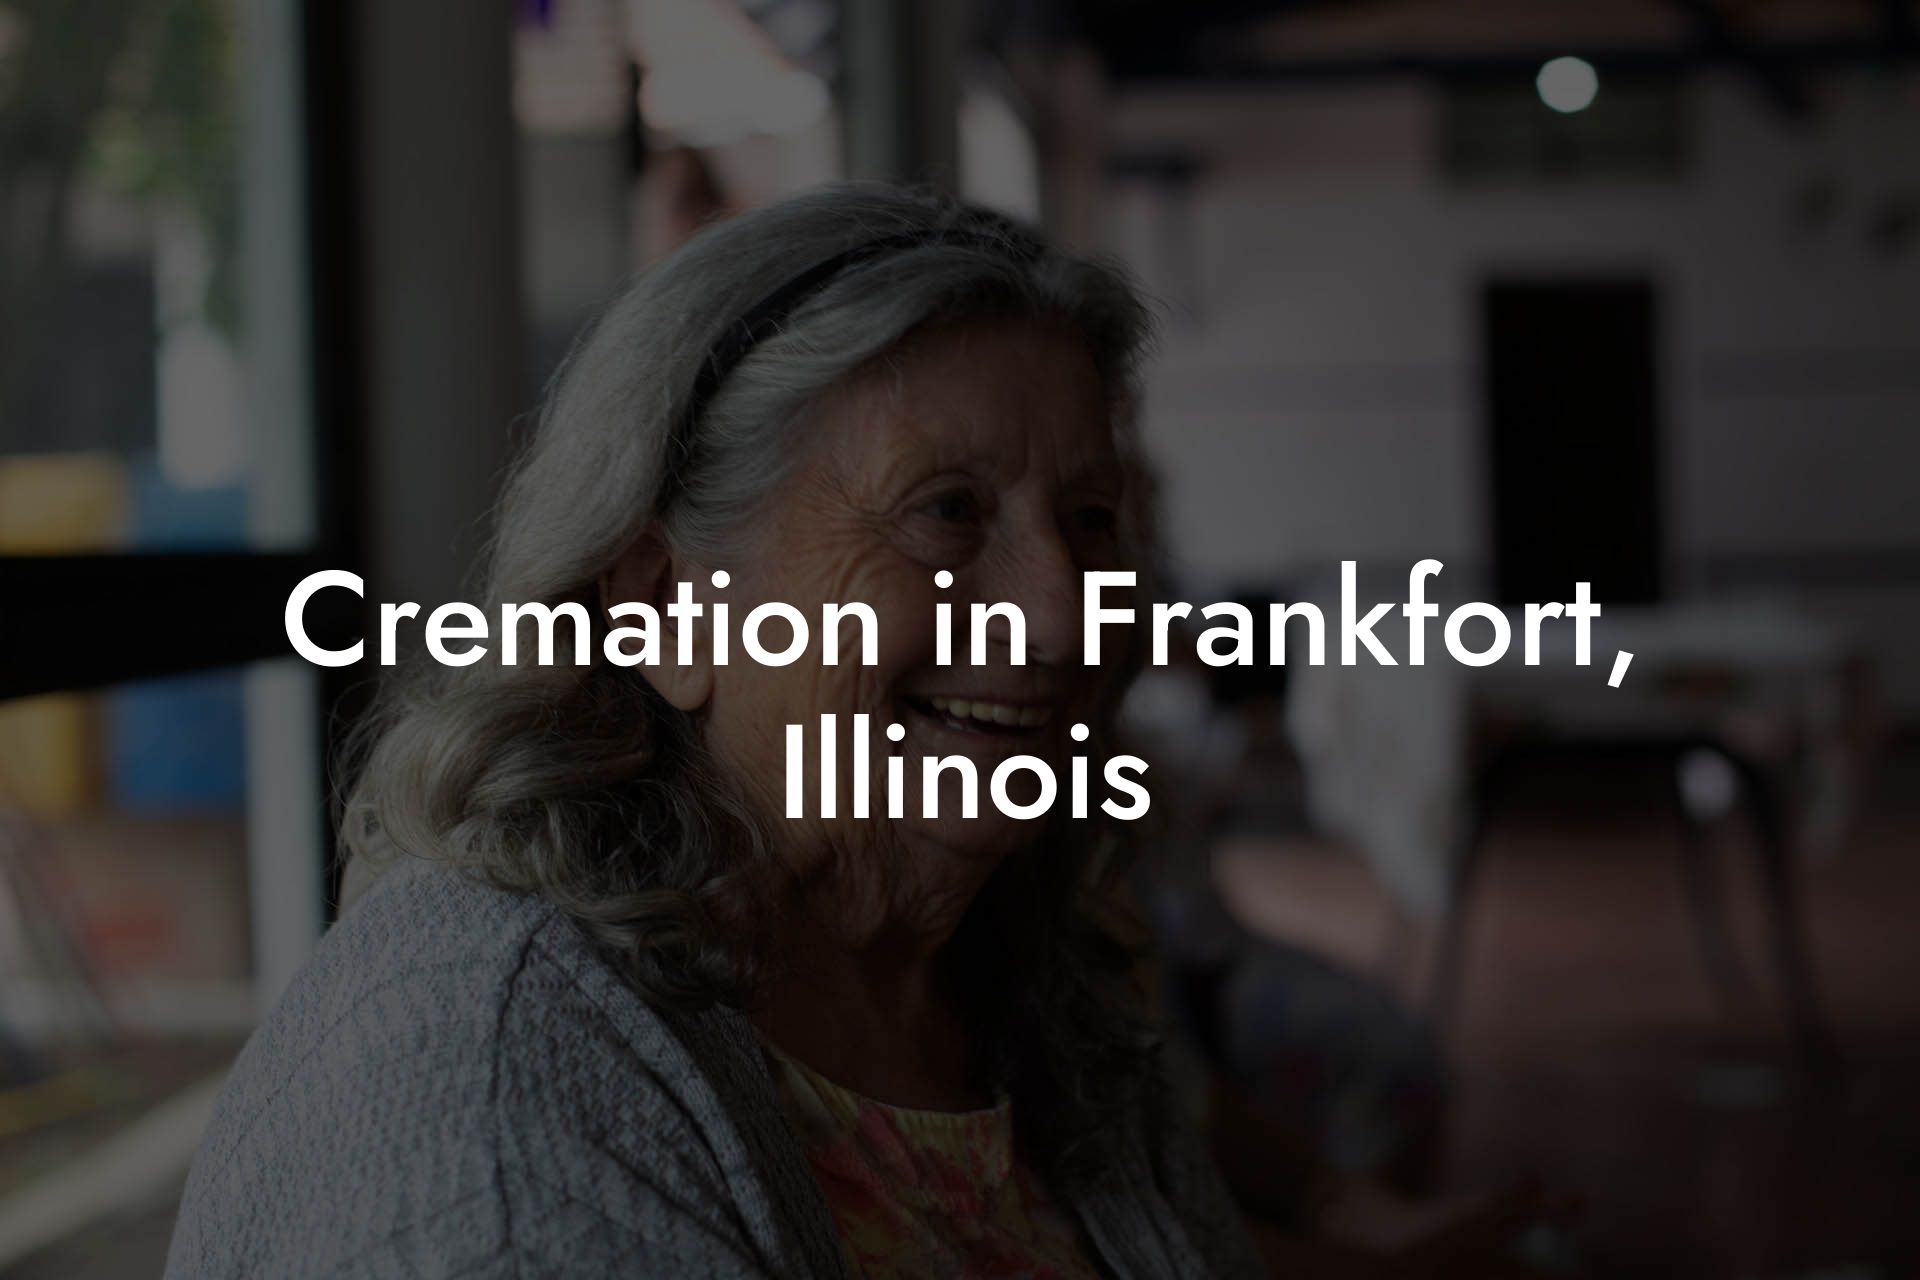 Cremation in Frankfort, Illinois